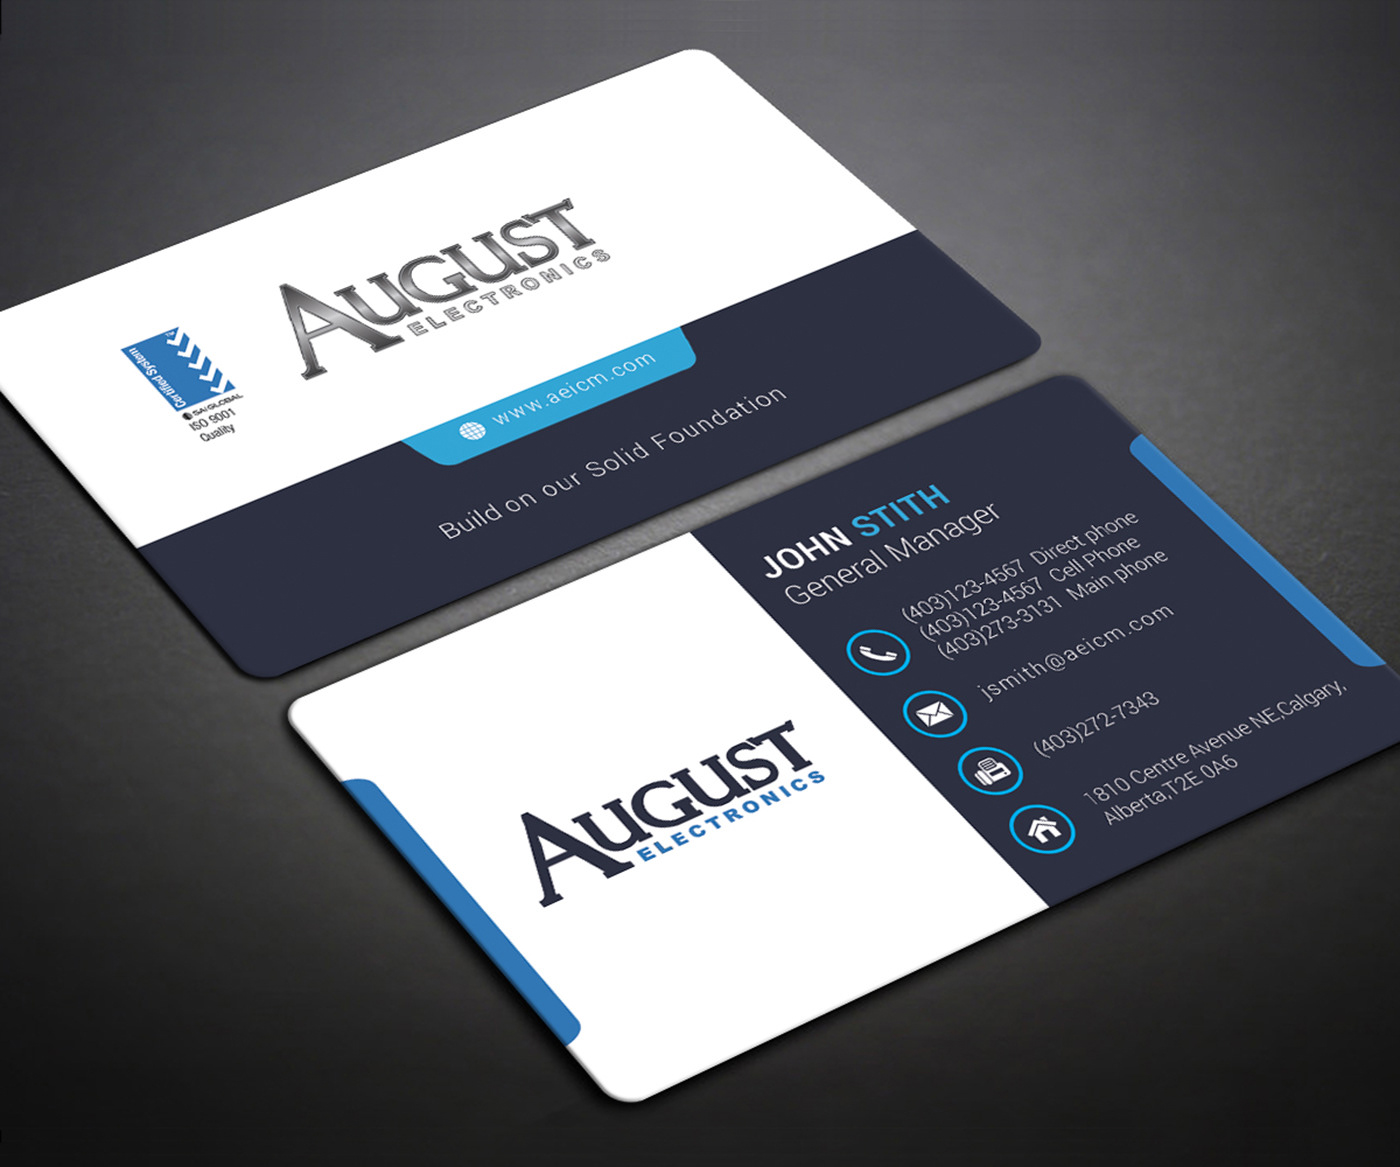 Business Card Mockup PSD file Free Download Vol.1 on Behance